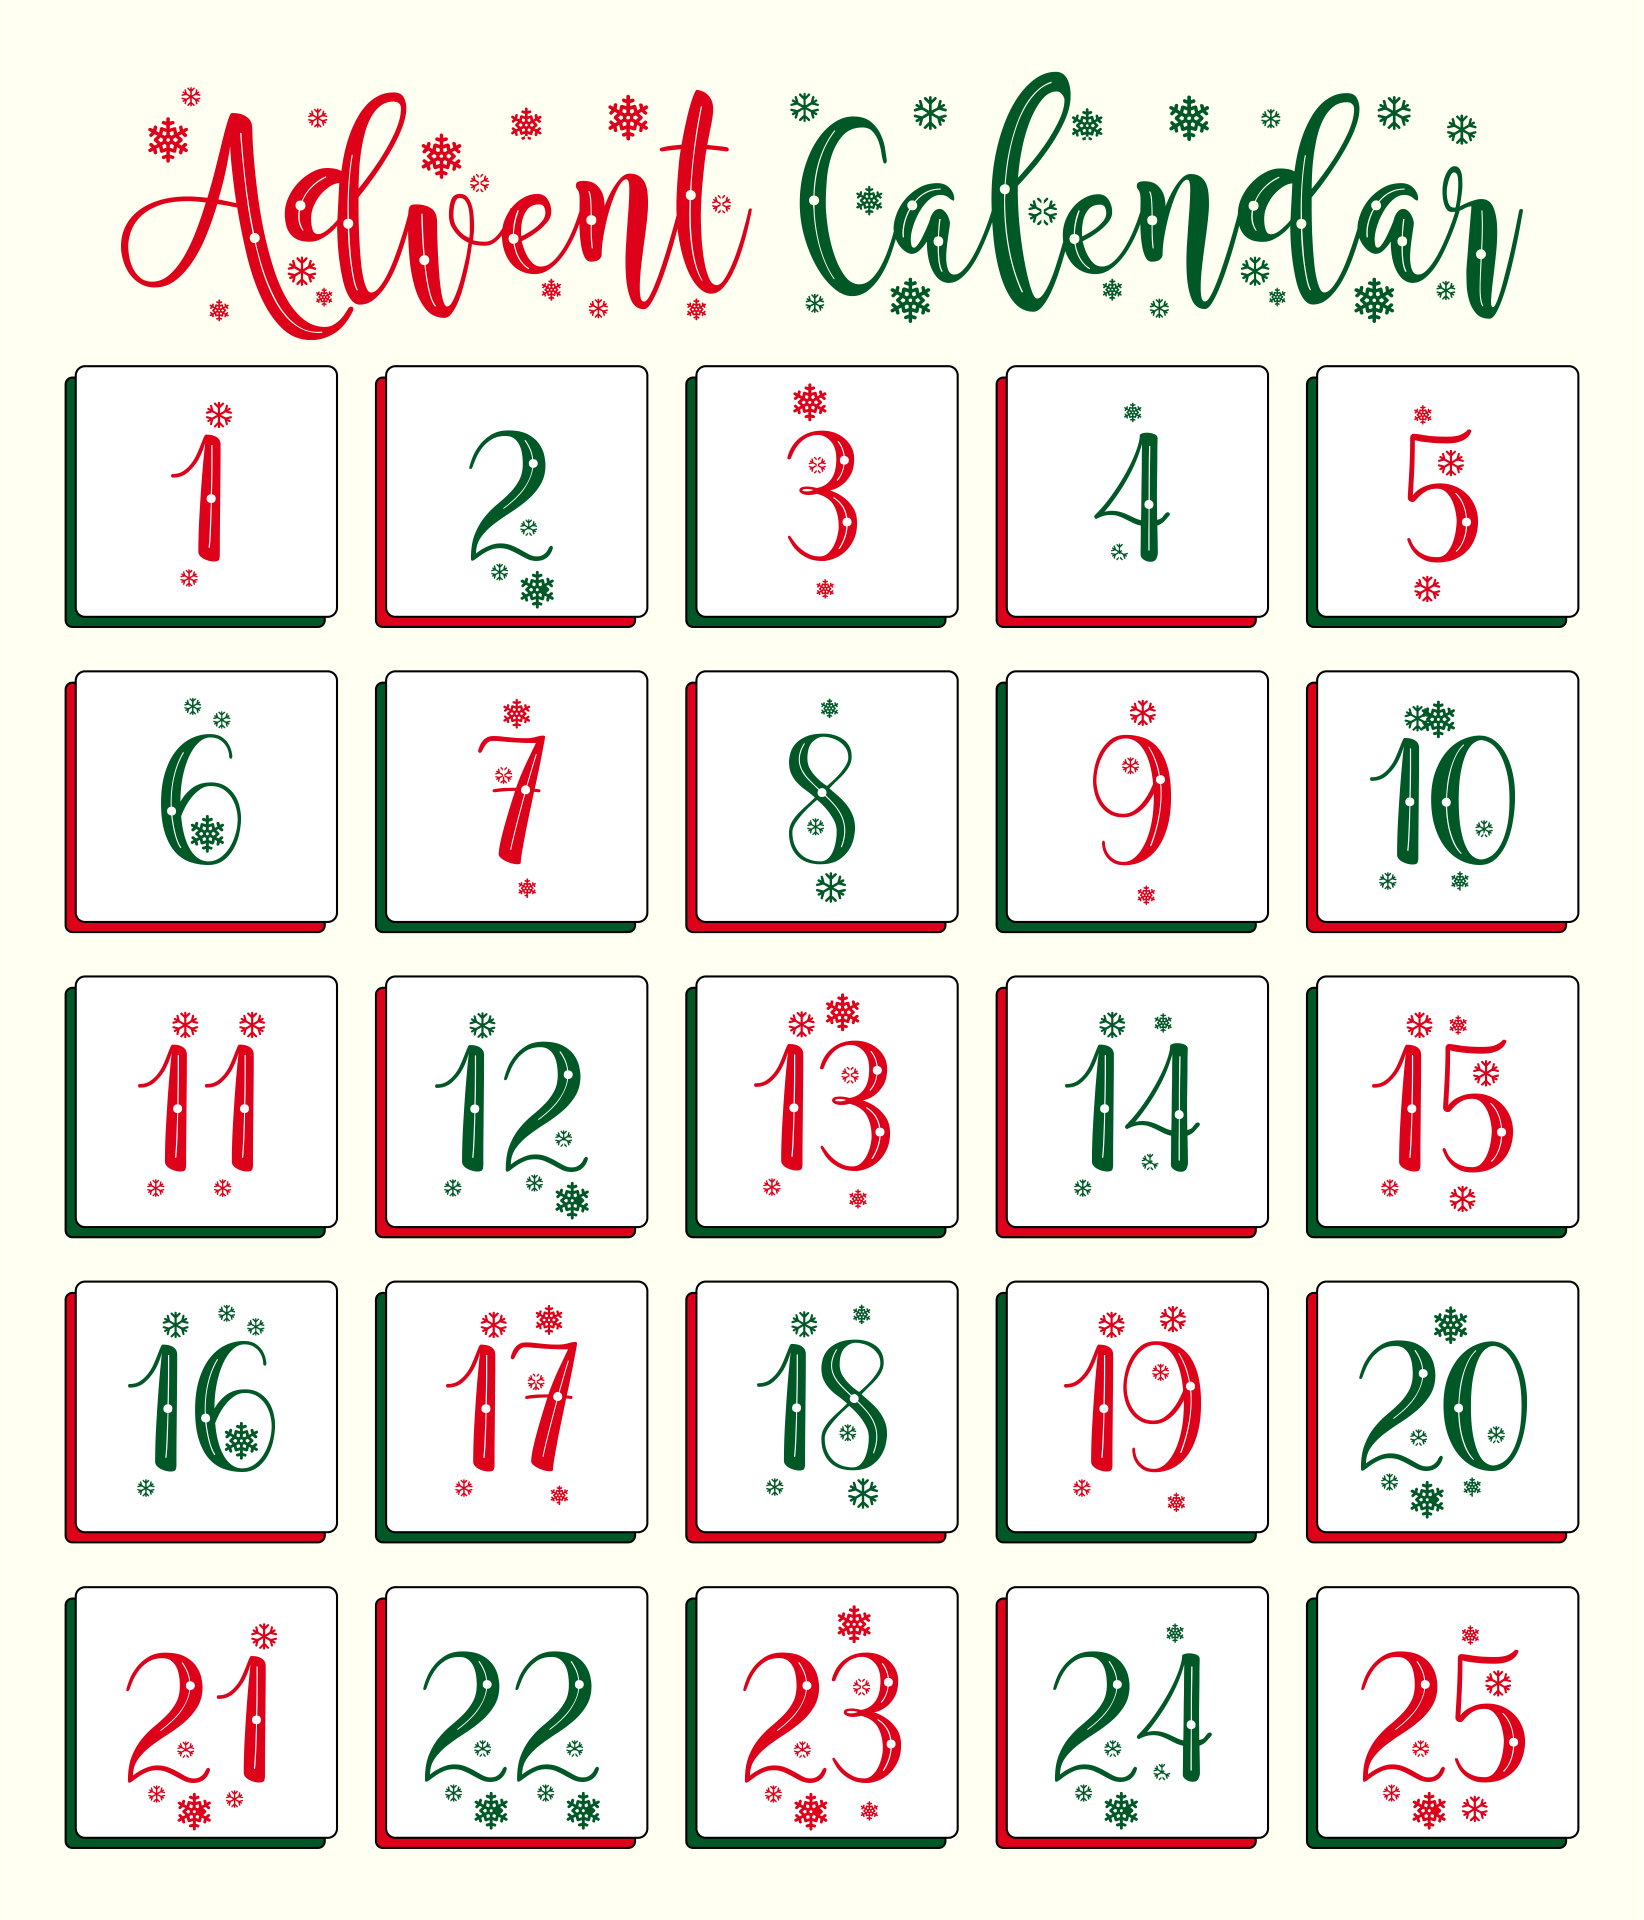 7-best-images-of-advent-printable-worksheets-printable-advent